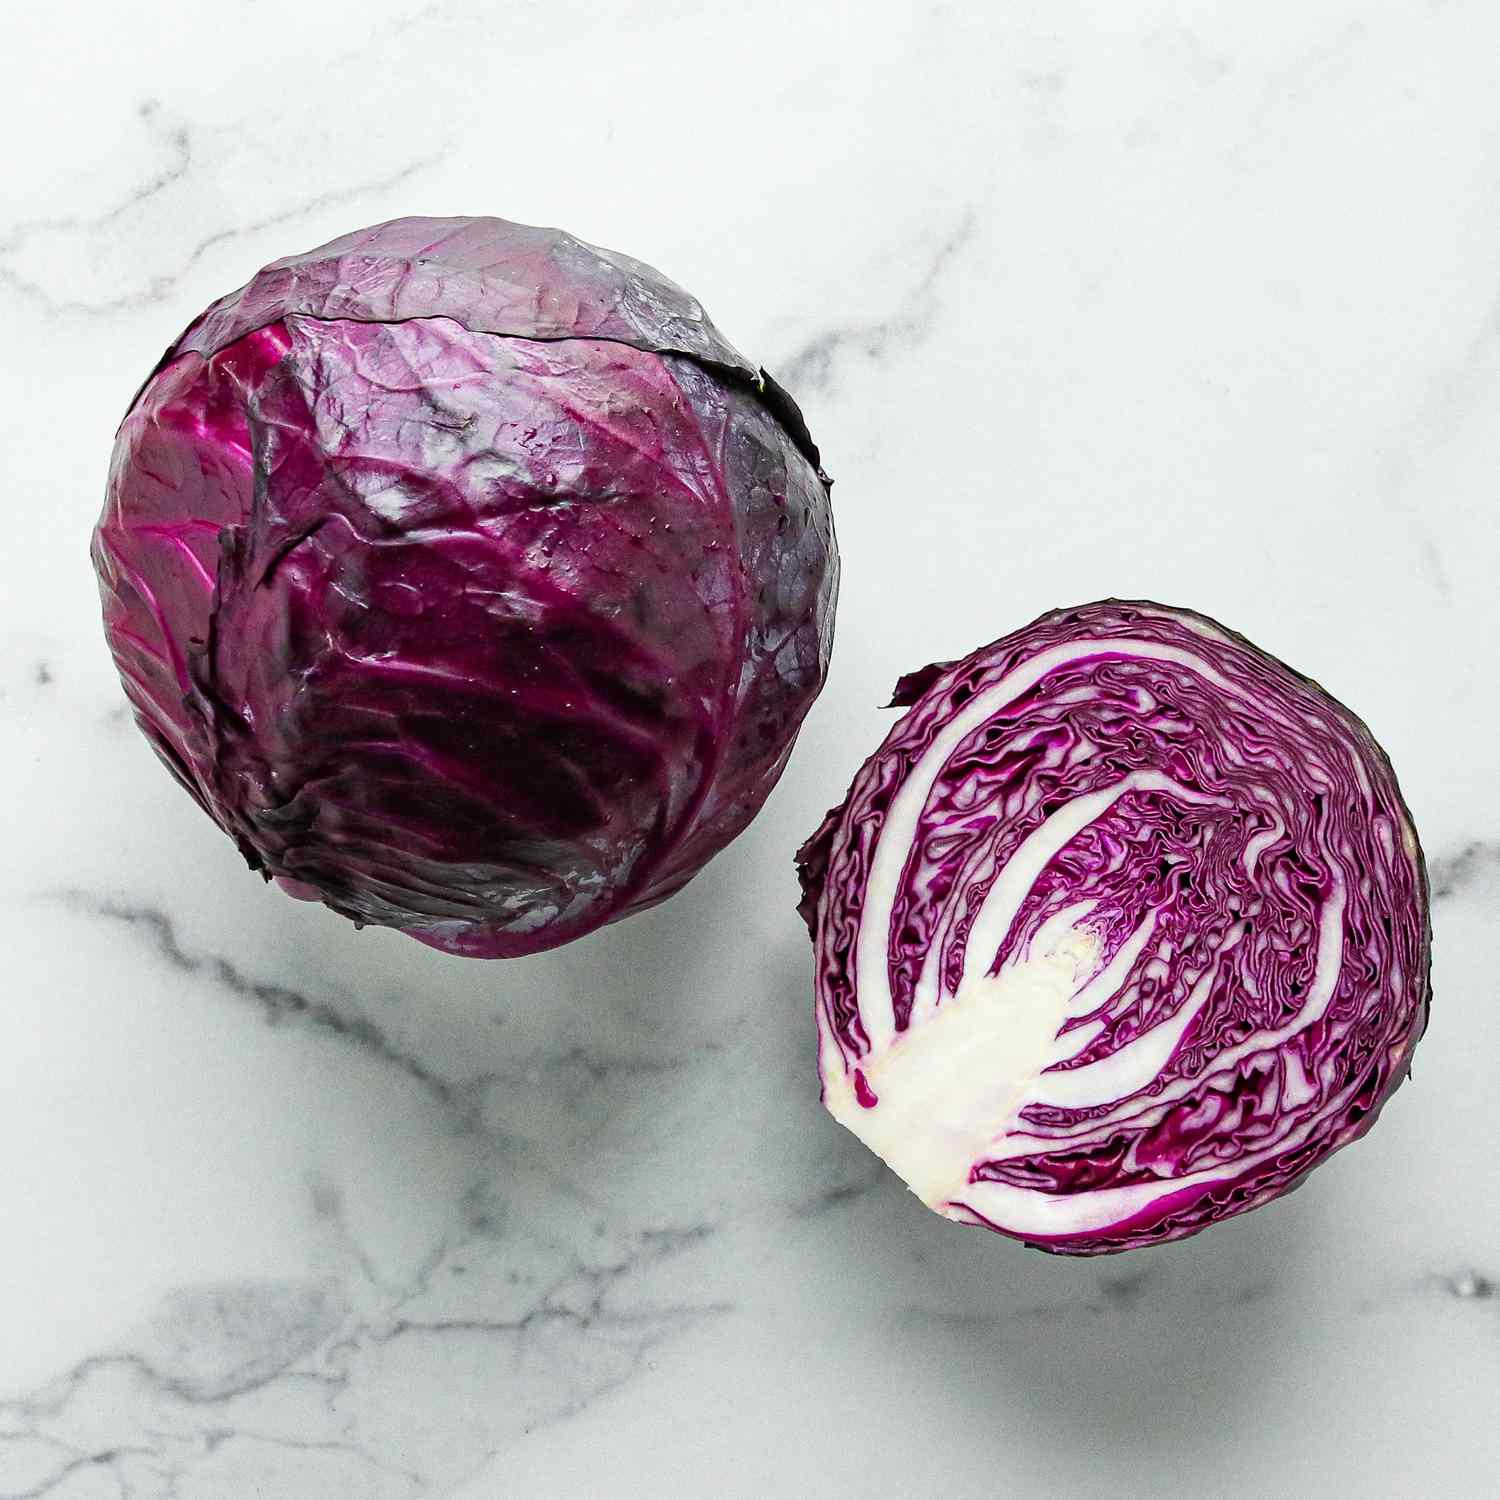 AA head of red cabbage on marble